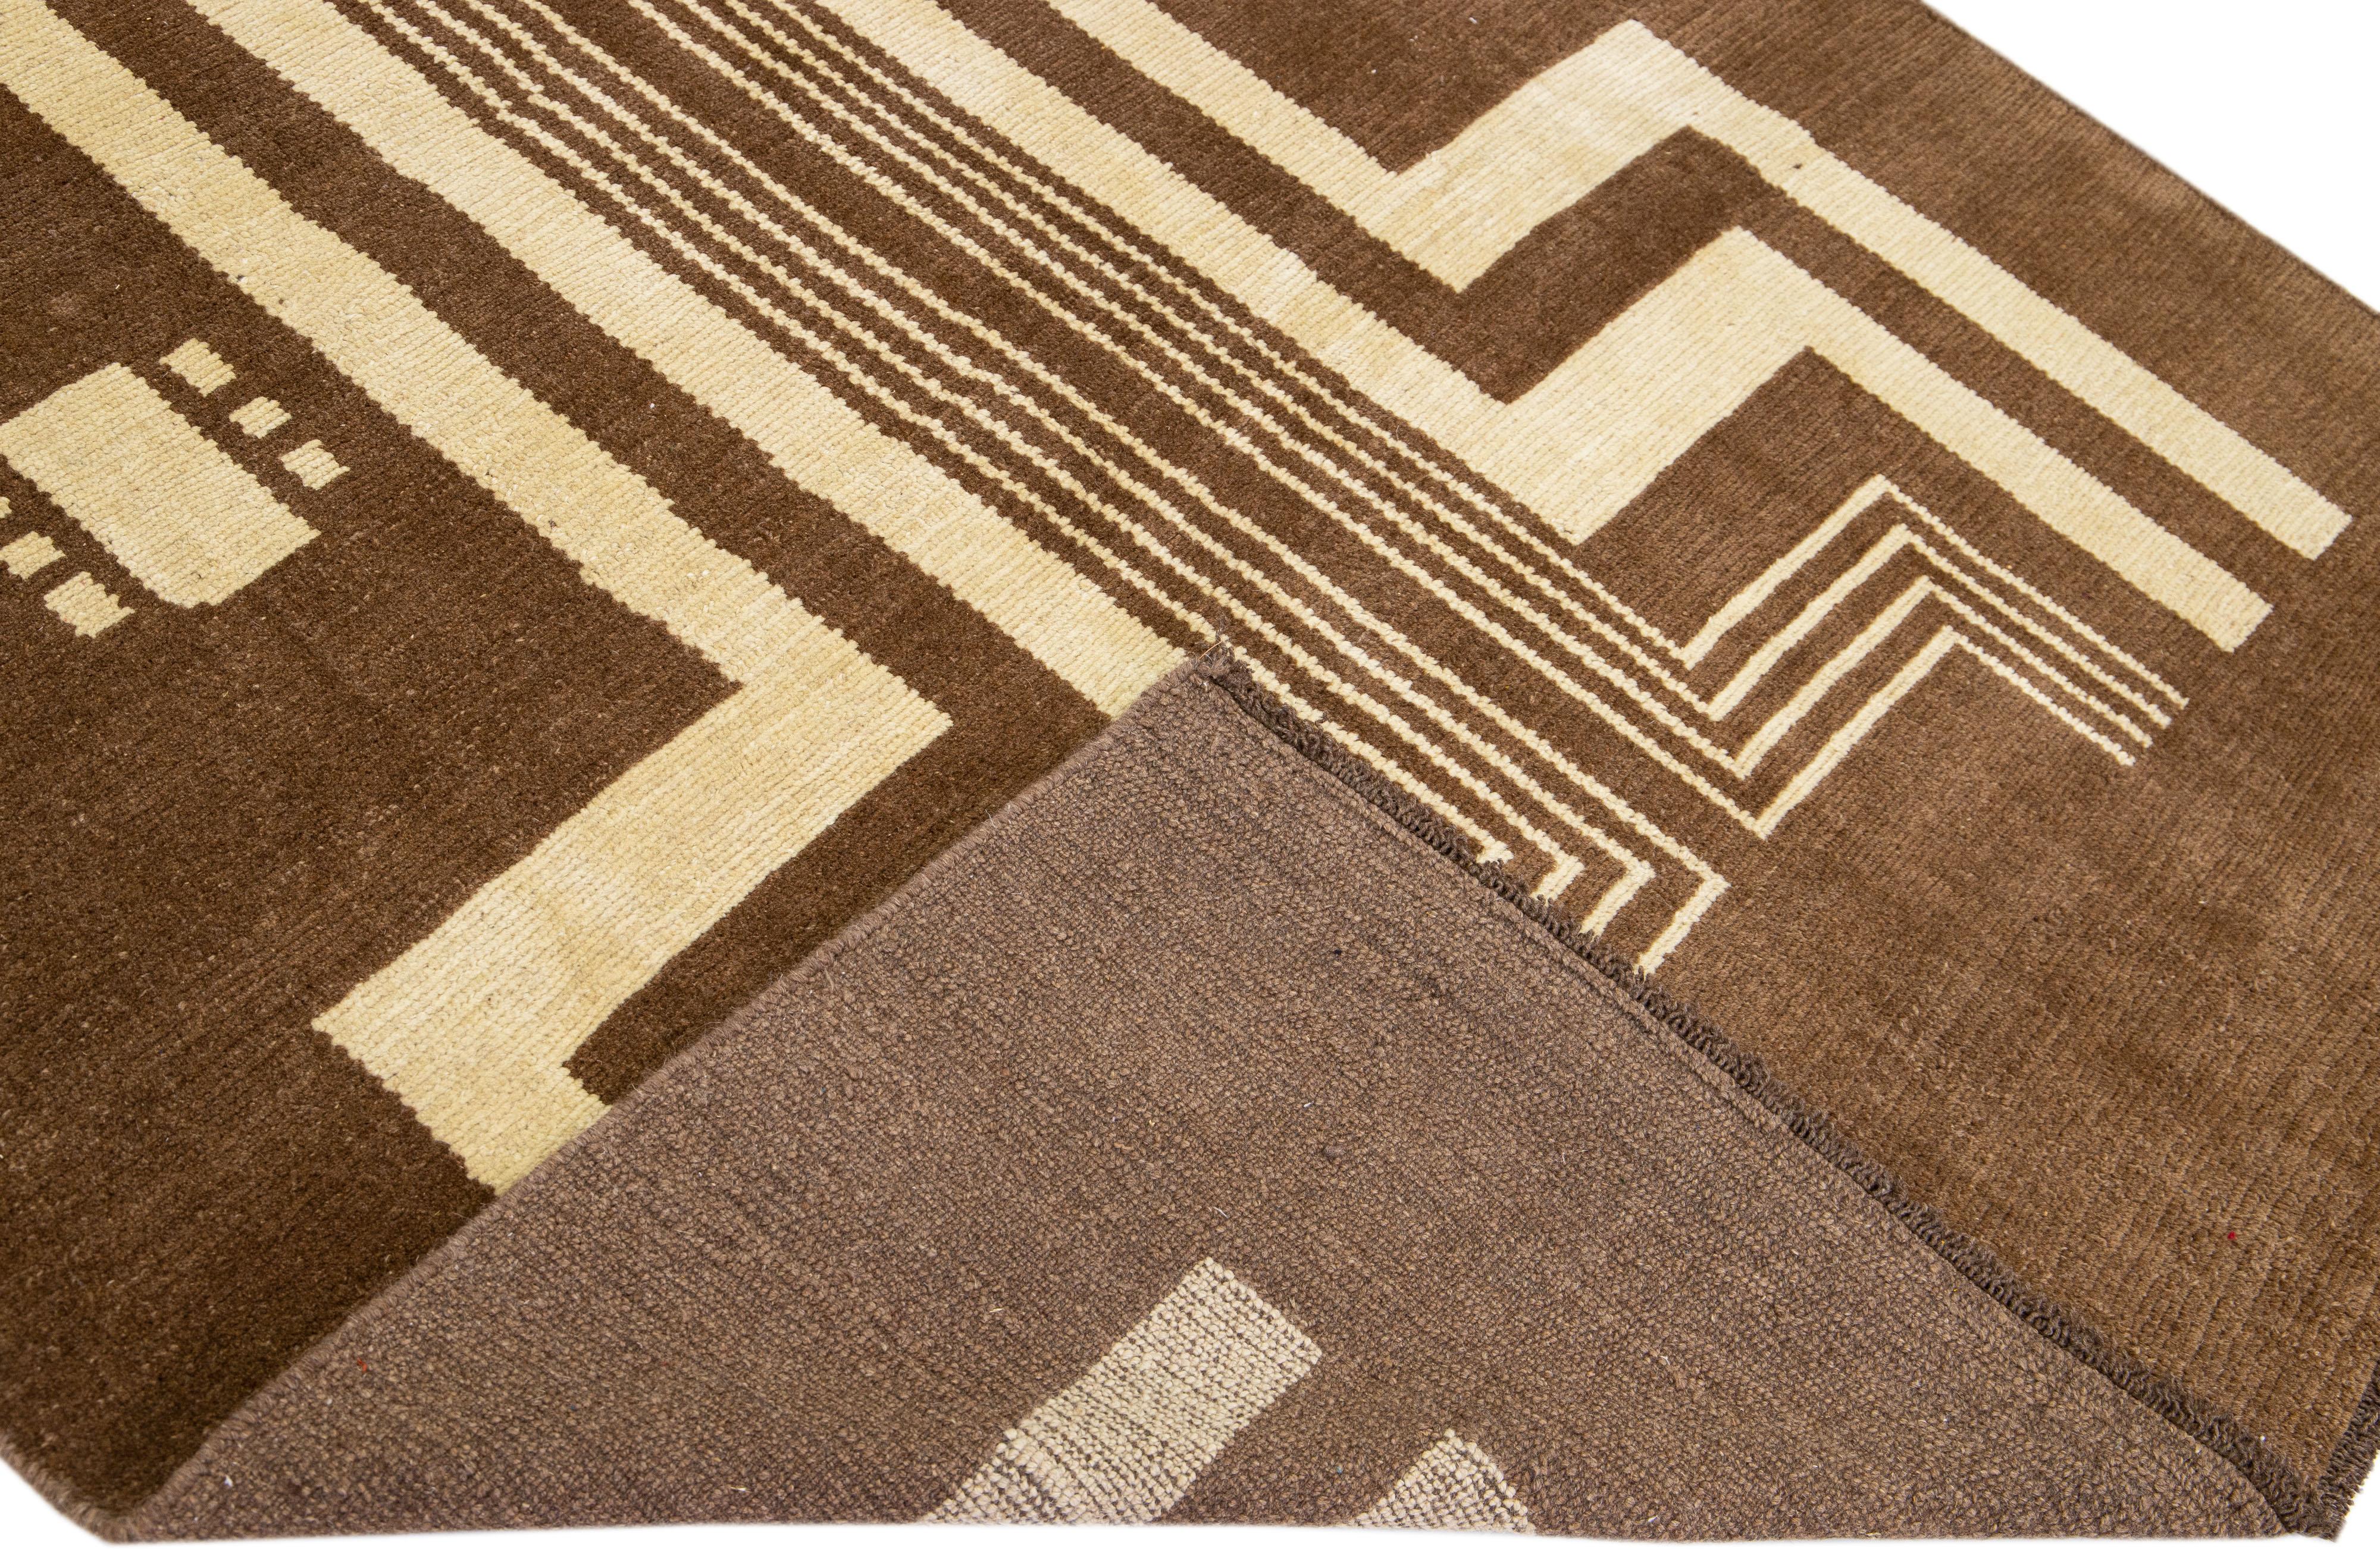 This Beautiful Modern Art Deco handmade wool rug makes part of our Northwest collection and features a brown color field and beige accents in a gorgeous geometric tribal design.

This rug measures: 6'4